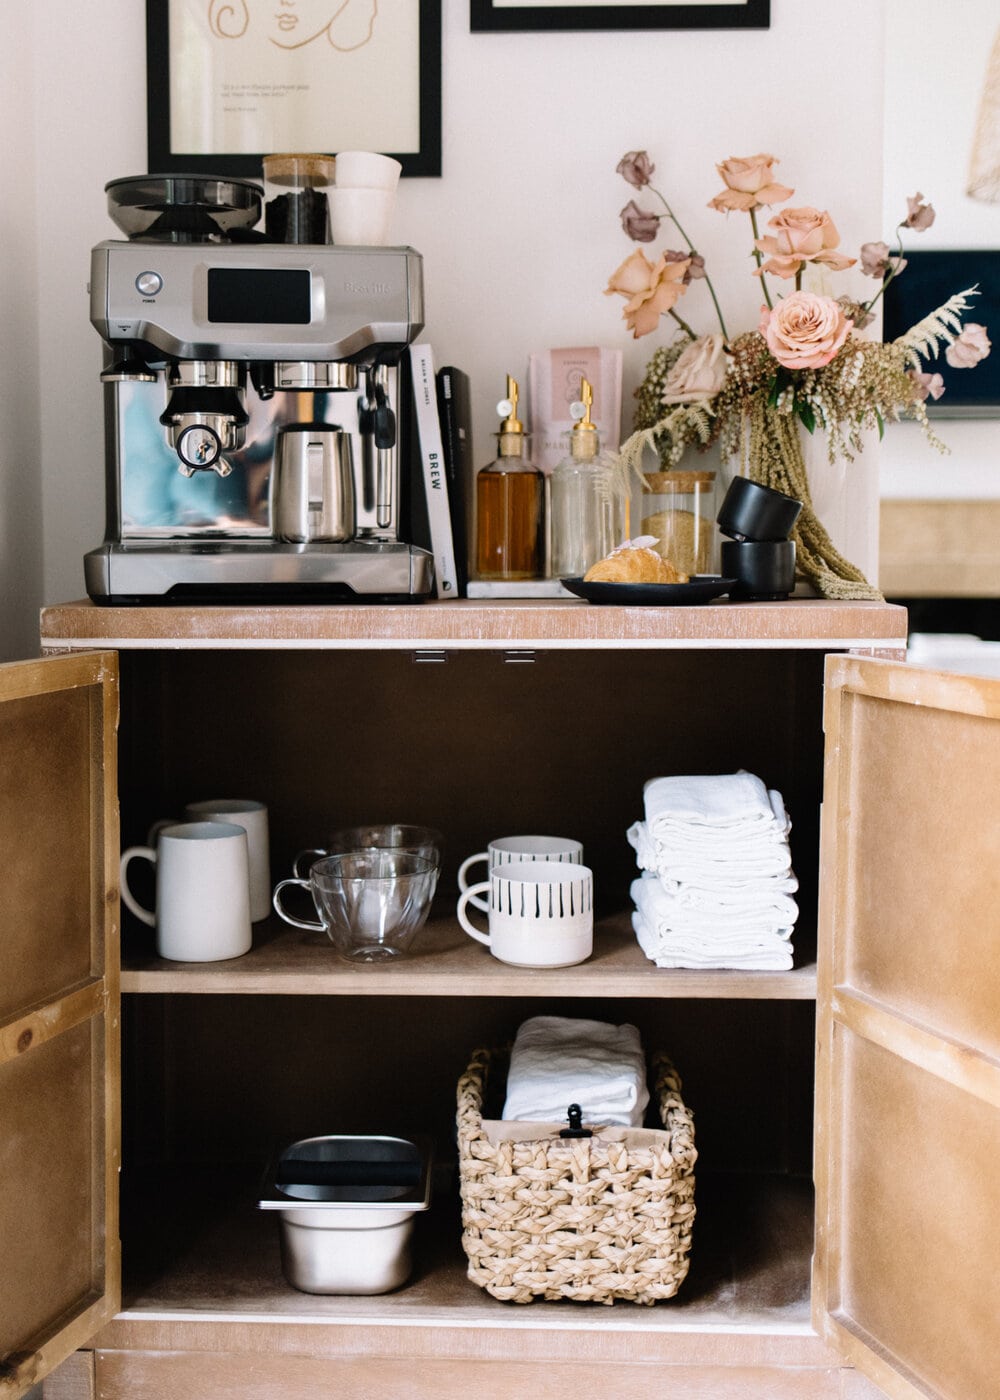 a cabinet turned into a coffee cabinet with cups, towels, and an espresso machine